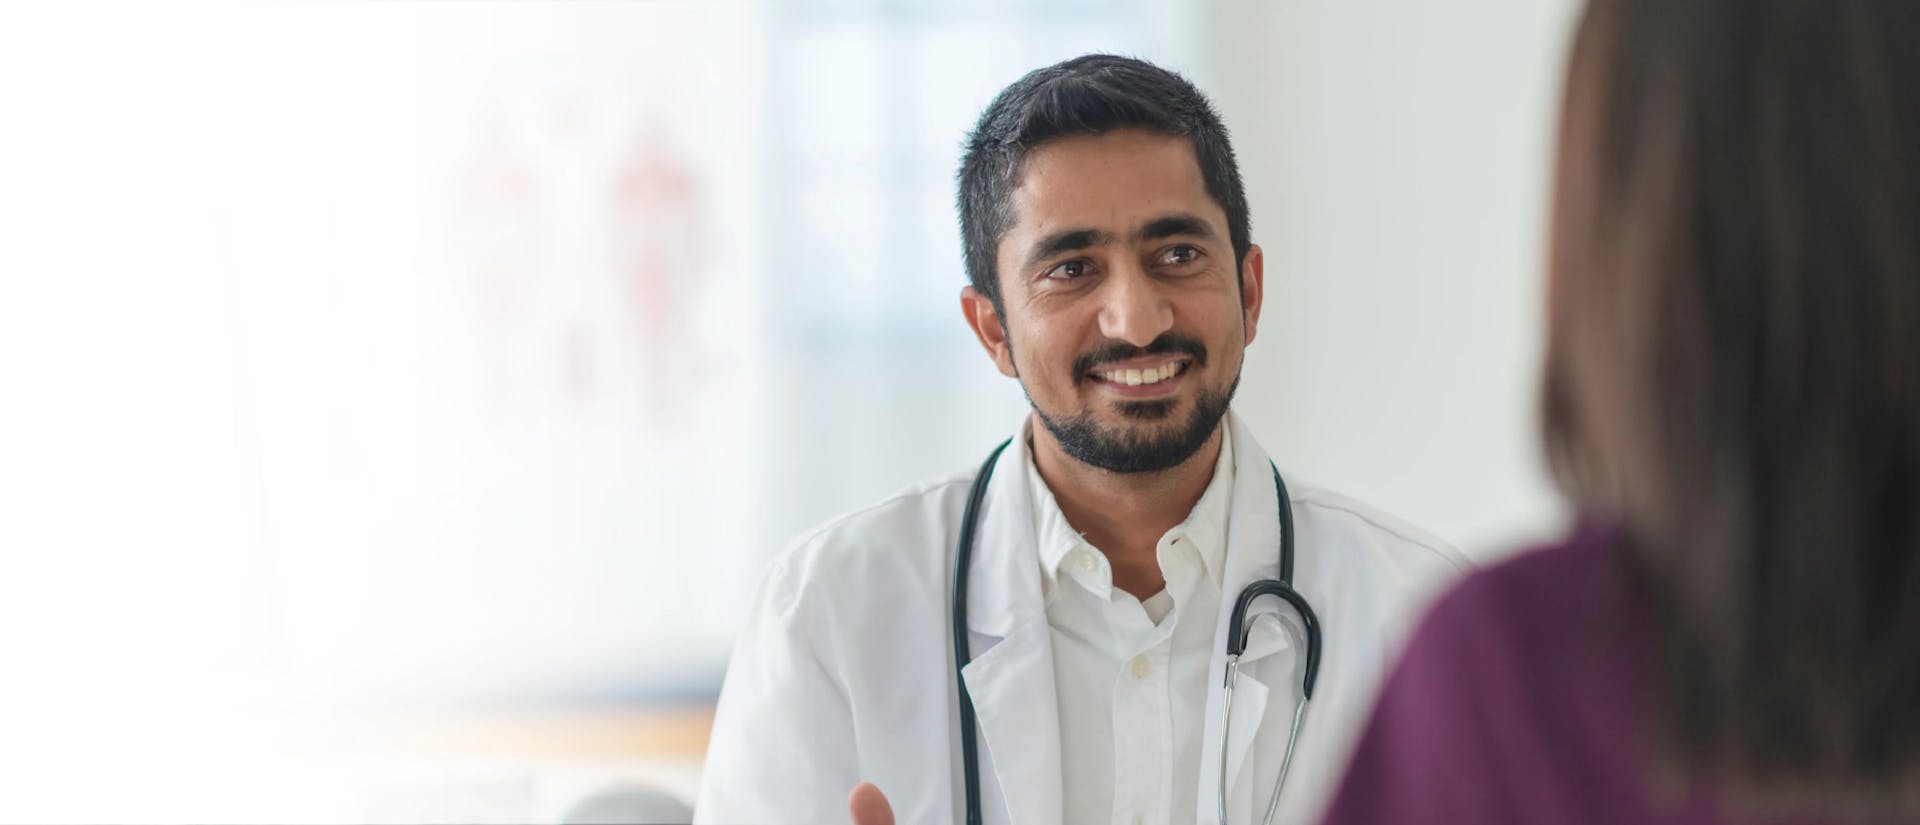 Image of a doctor looking at a patient